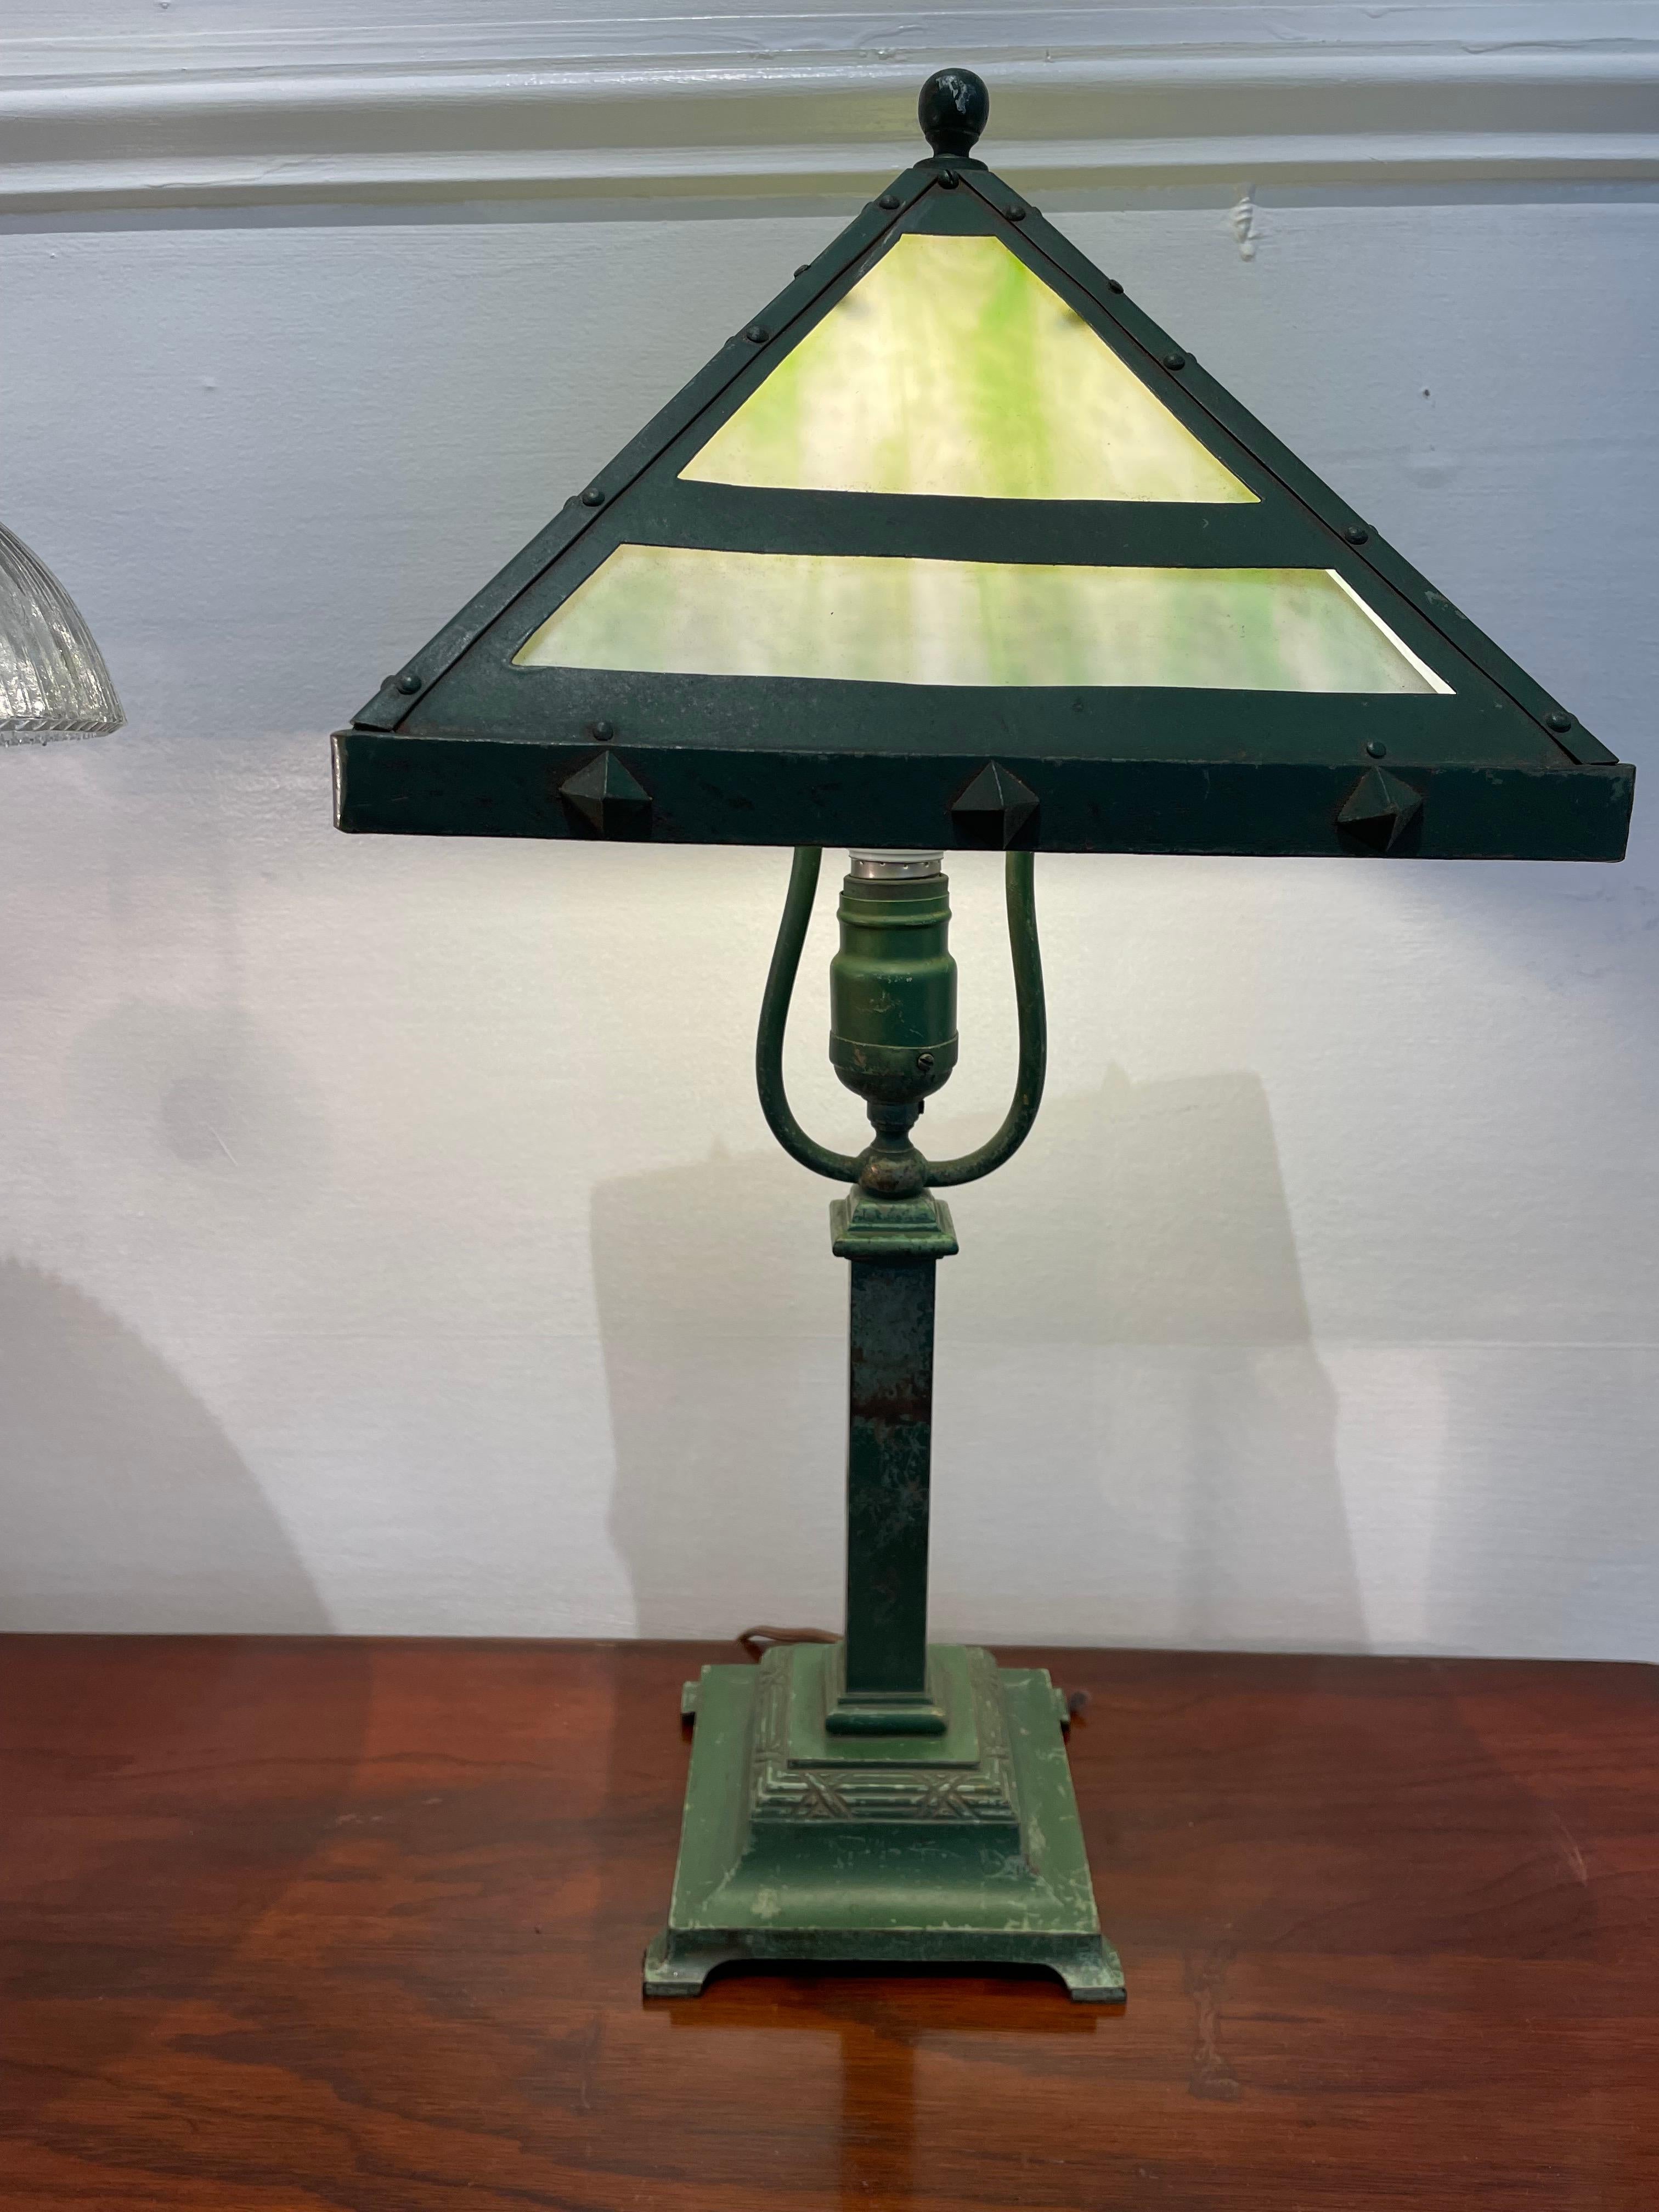 A lovely Bradley and Hubbard table or desk lamp from the Arts and Crafts period. American. An iron base with the original green paint, which also appears along the frame of the shade. The shade is adorned with raised stars giving the lamp a slightly